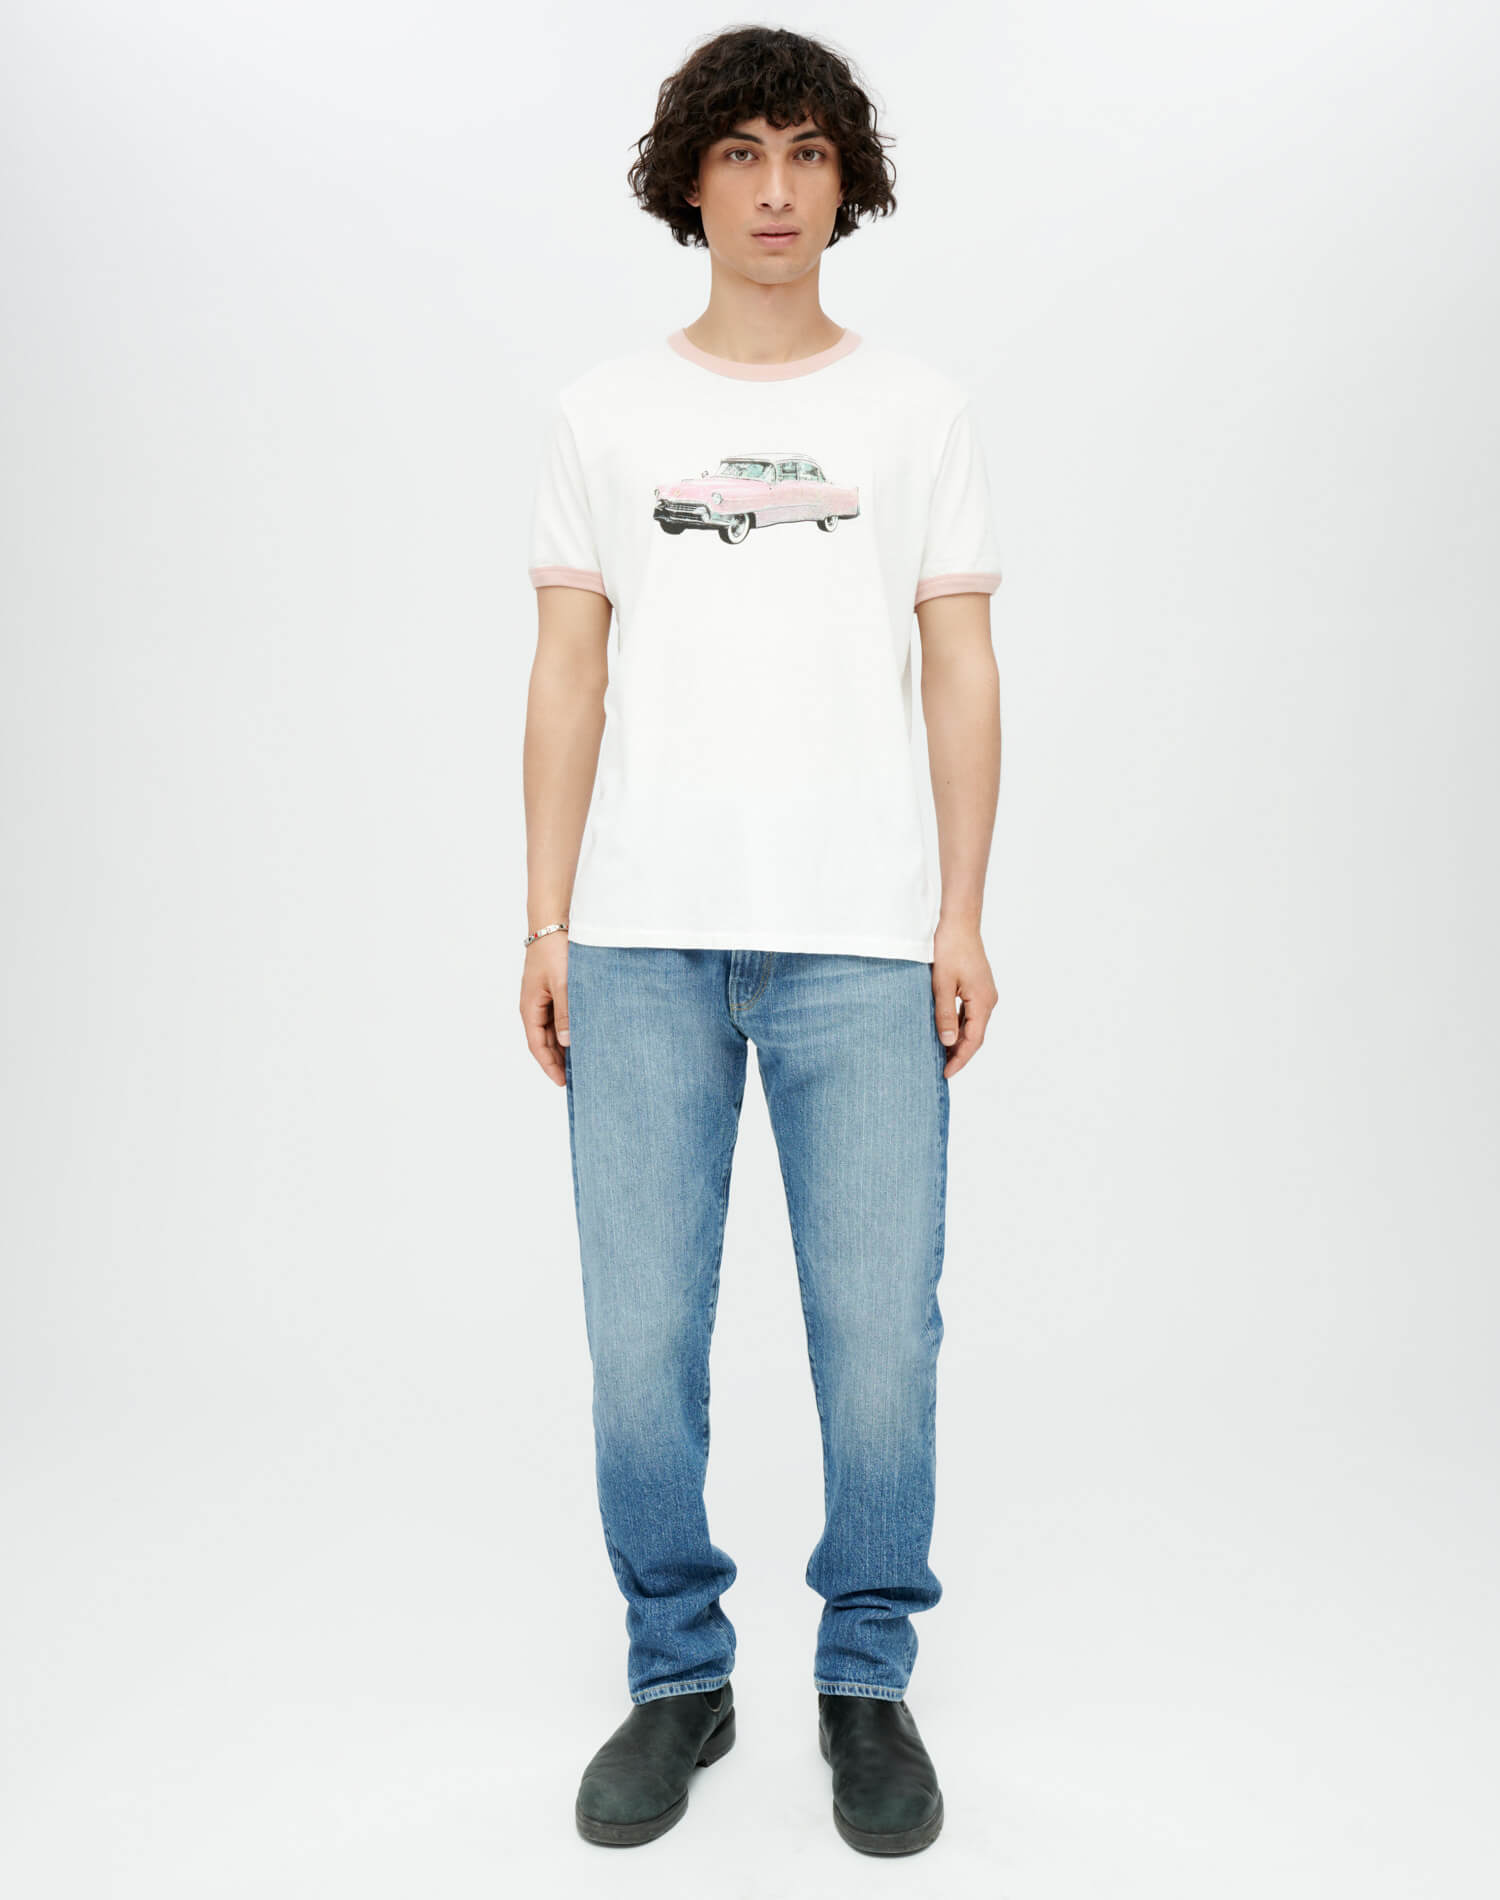 Ringer "Pink Caddy" Tee - Old White Pink